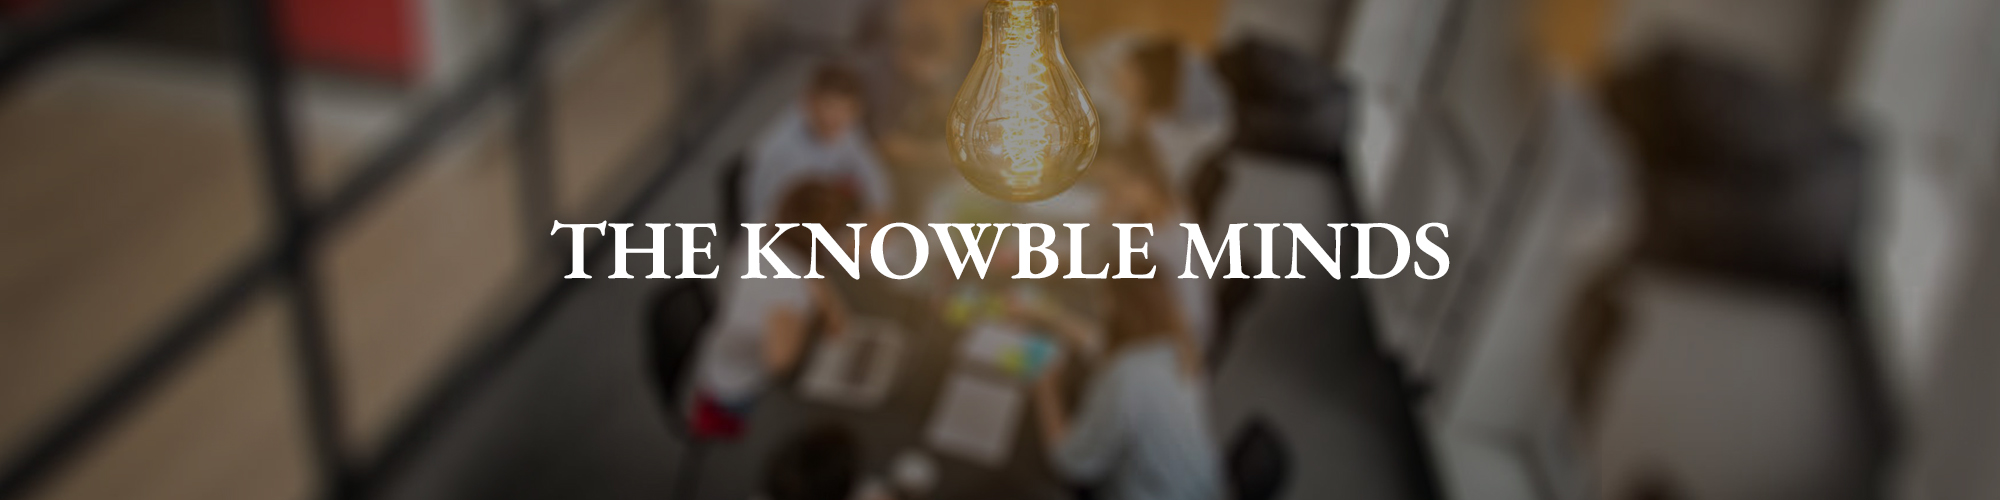 the knowbleminds - Team